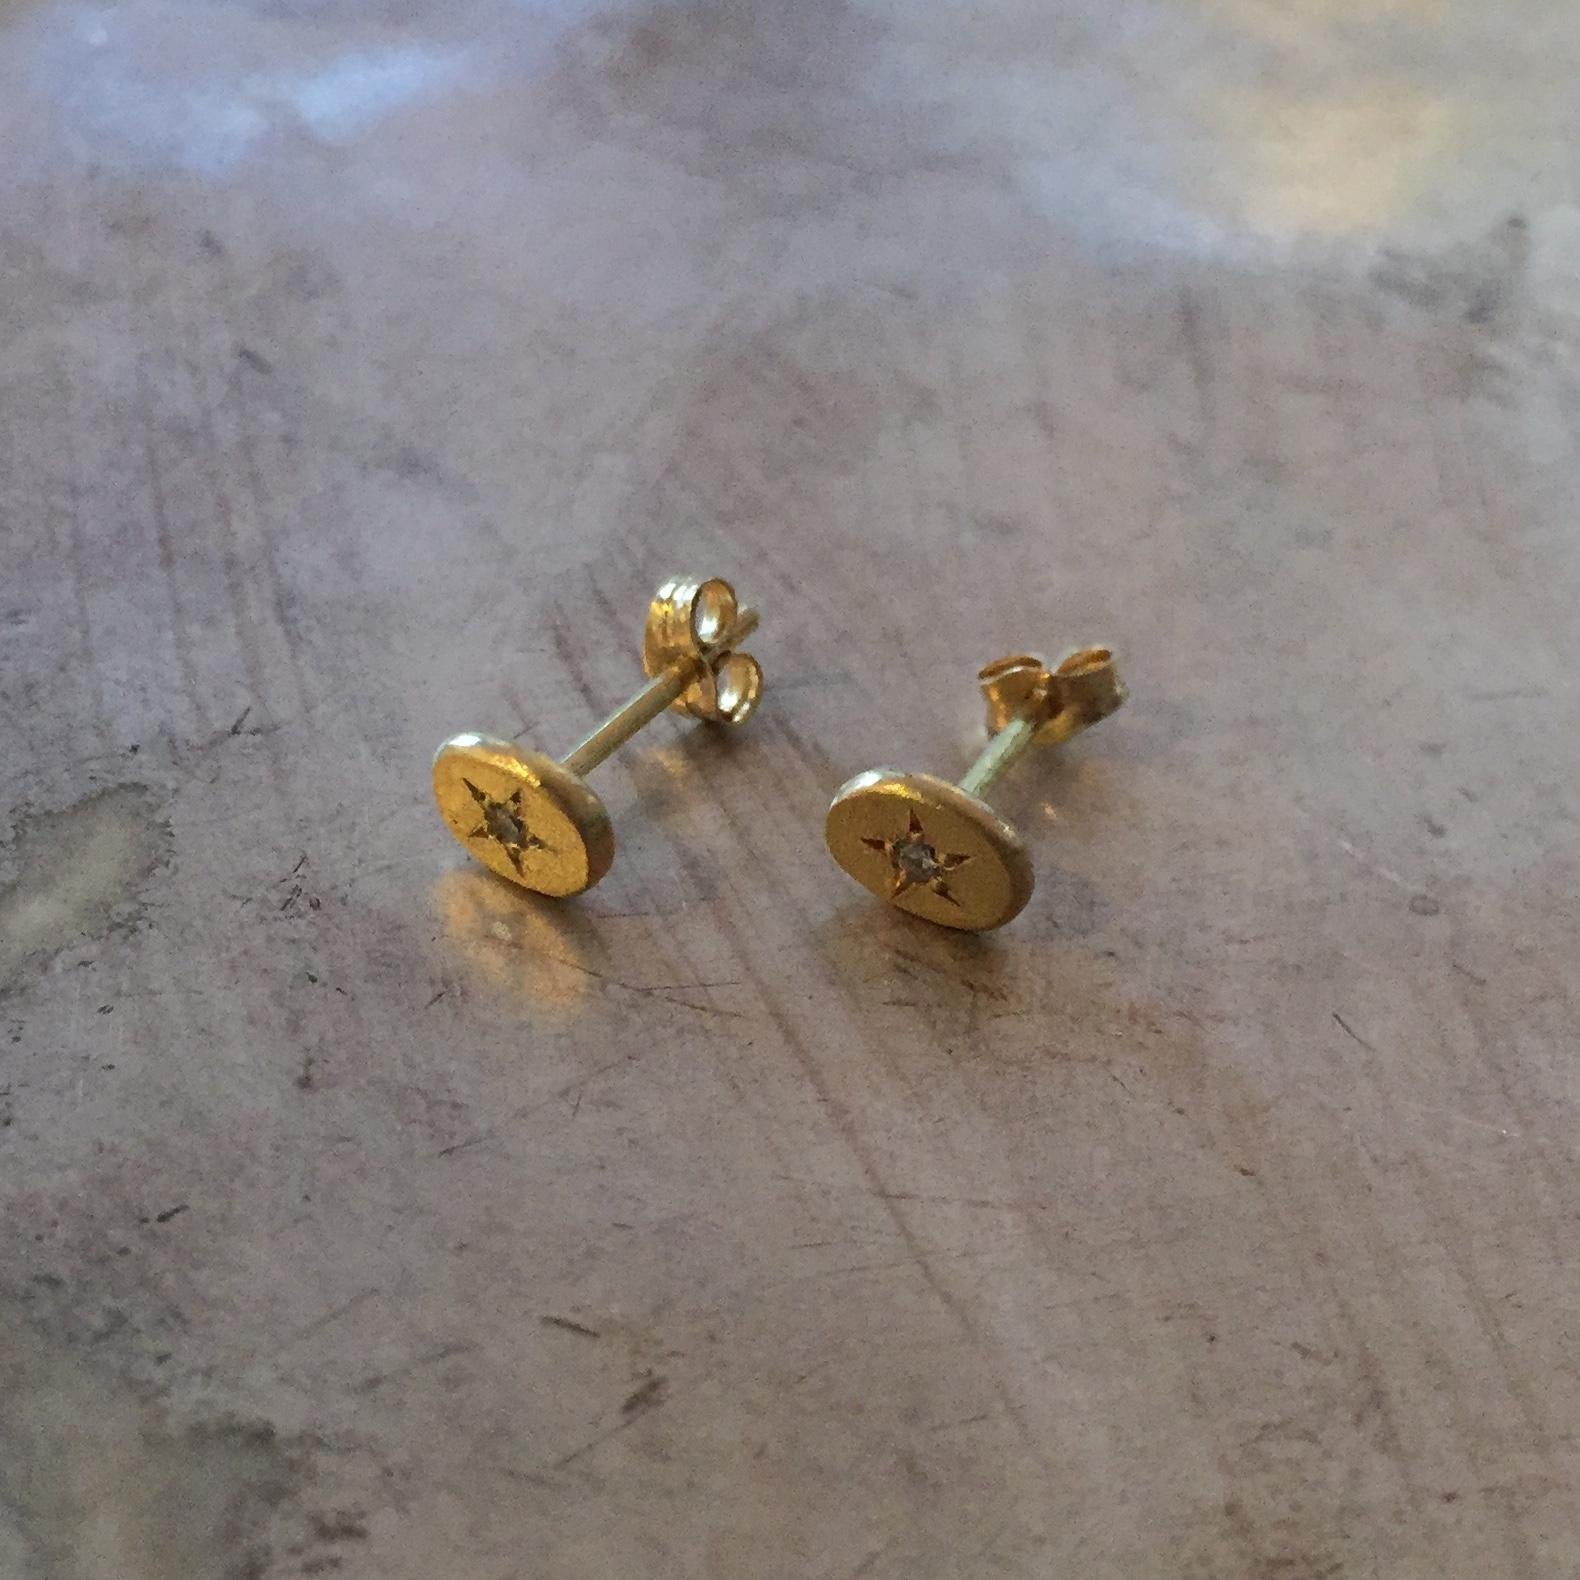 These 18k yellow gold stud earrings have a brushed finish which makes for a lovely contrast to the sparkling diamond which is star set in the oval shaped pebble. The ovals are 6mm x 4mm and each is set with a 0.01ct white brilliant cut diamond. This